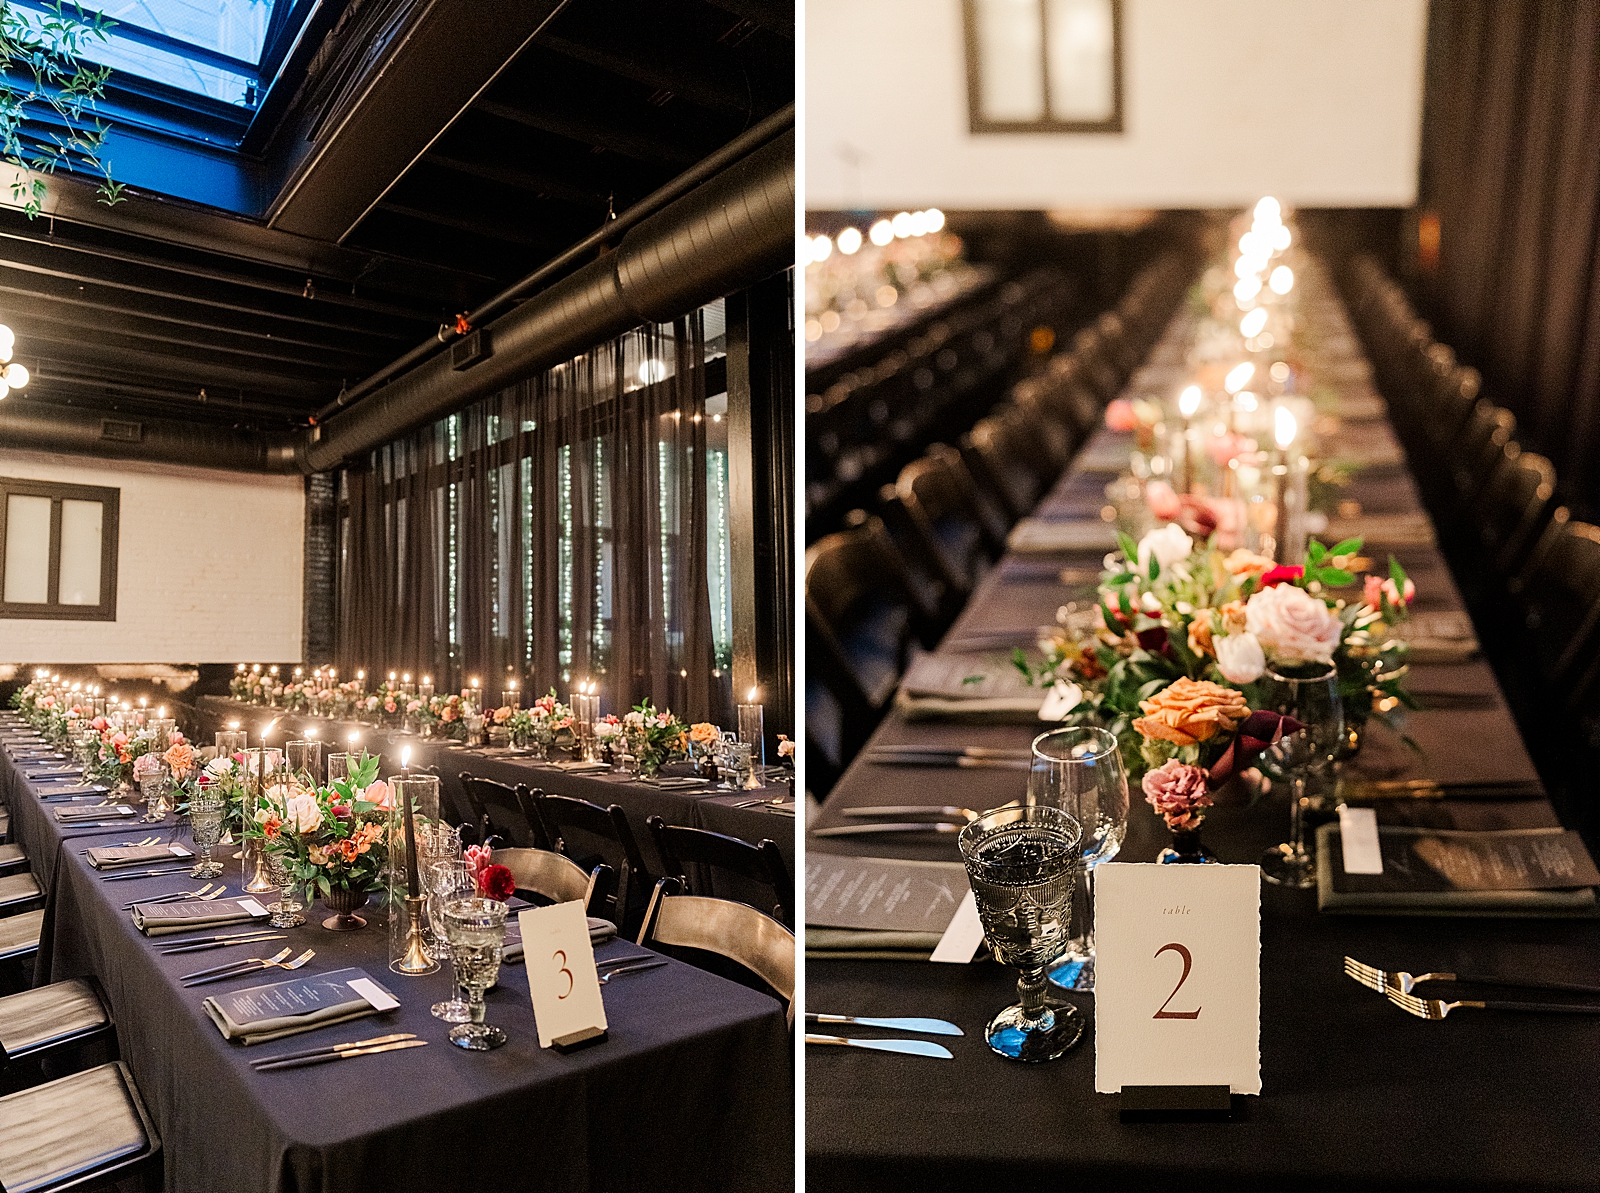 Left photo: Shot of two of the fully set reception tables.
Right photo: Shot of a fully set reception table. 